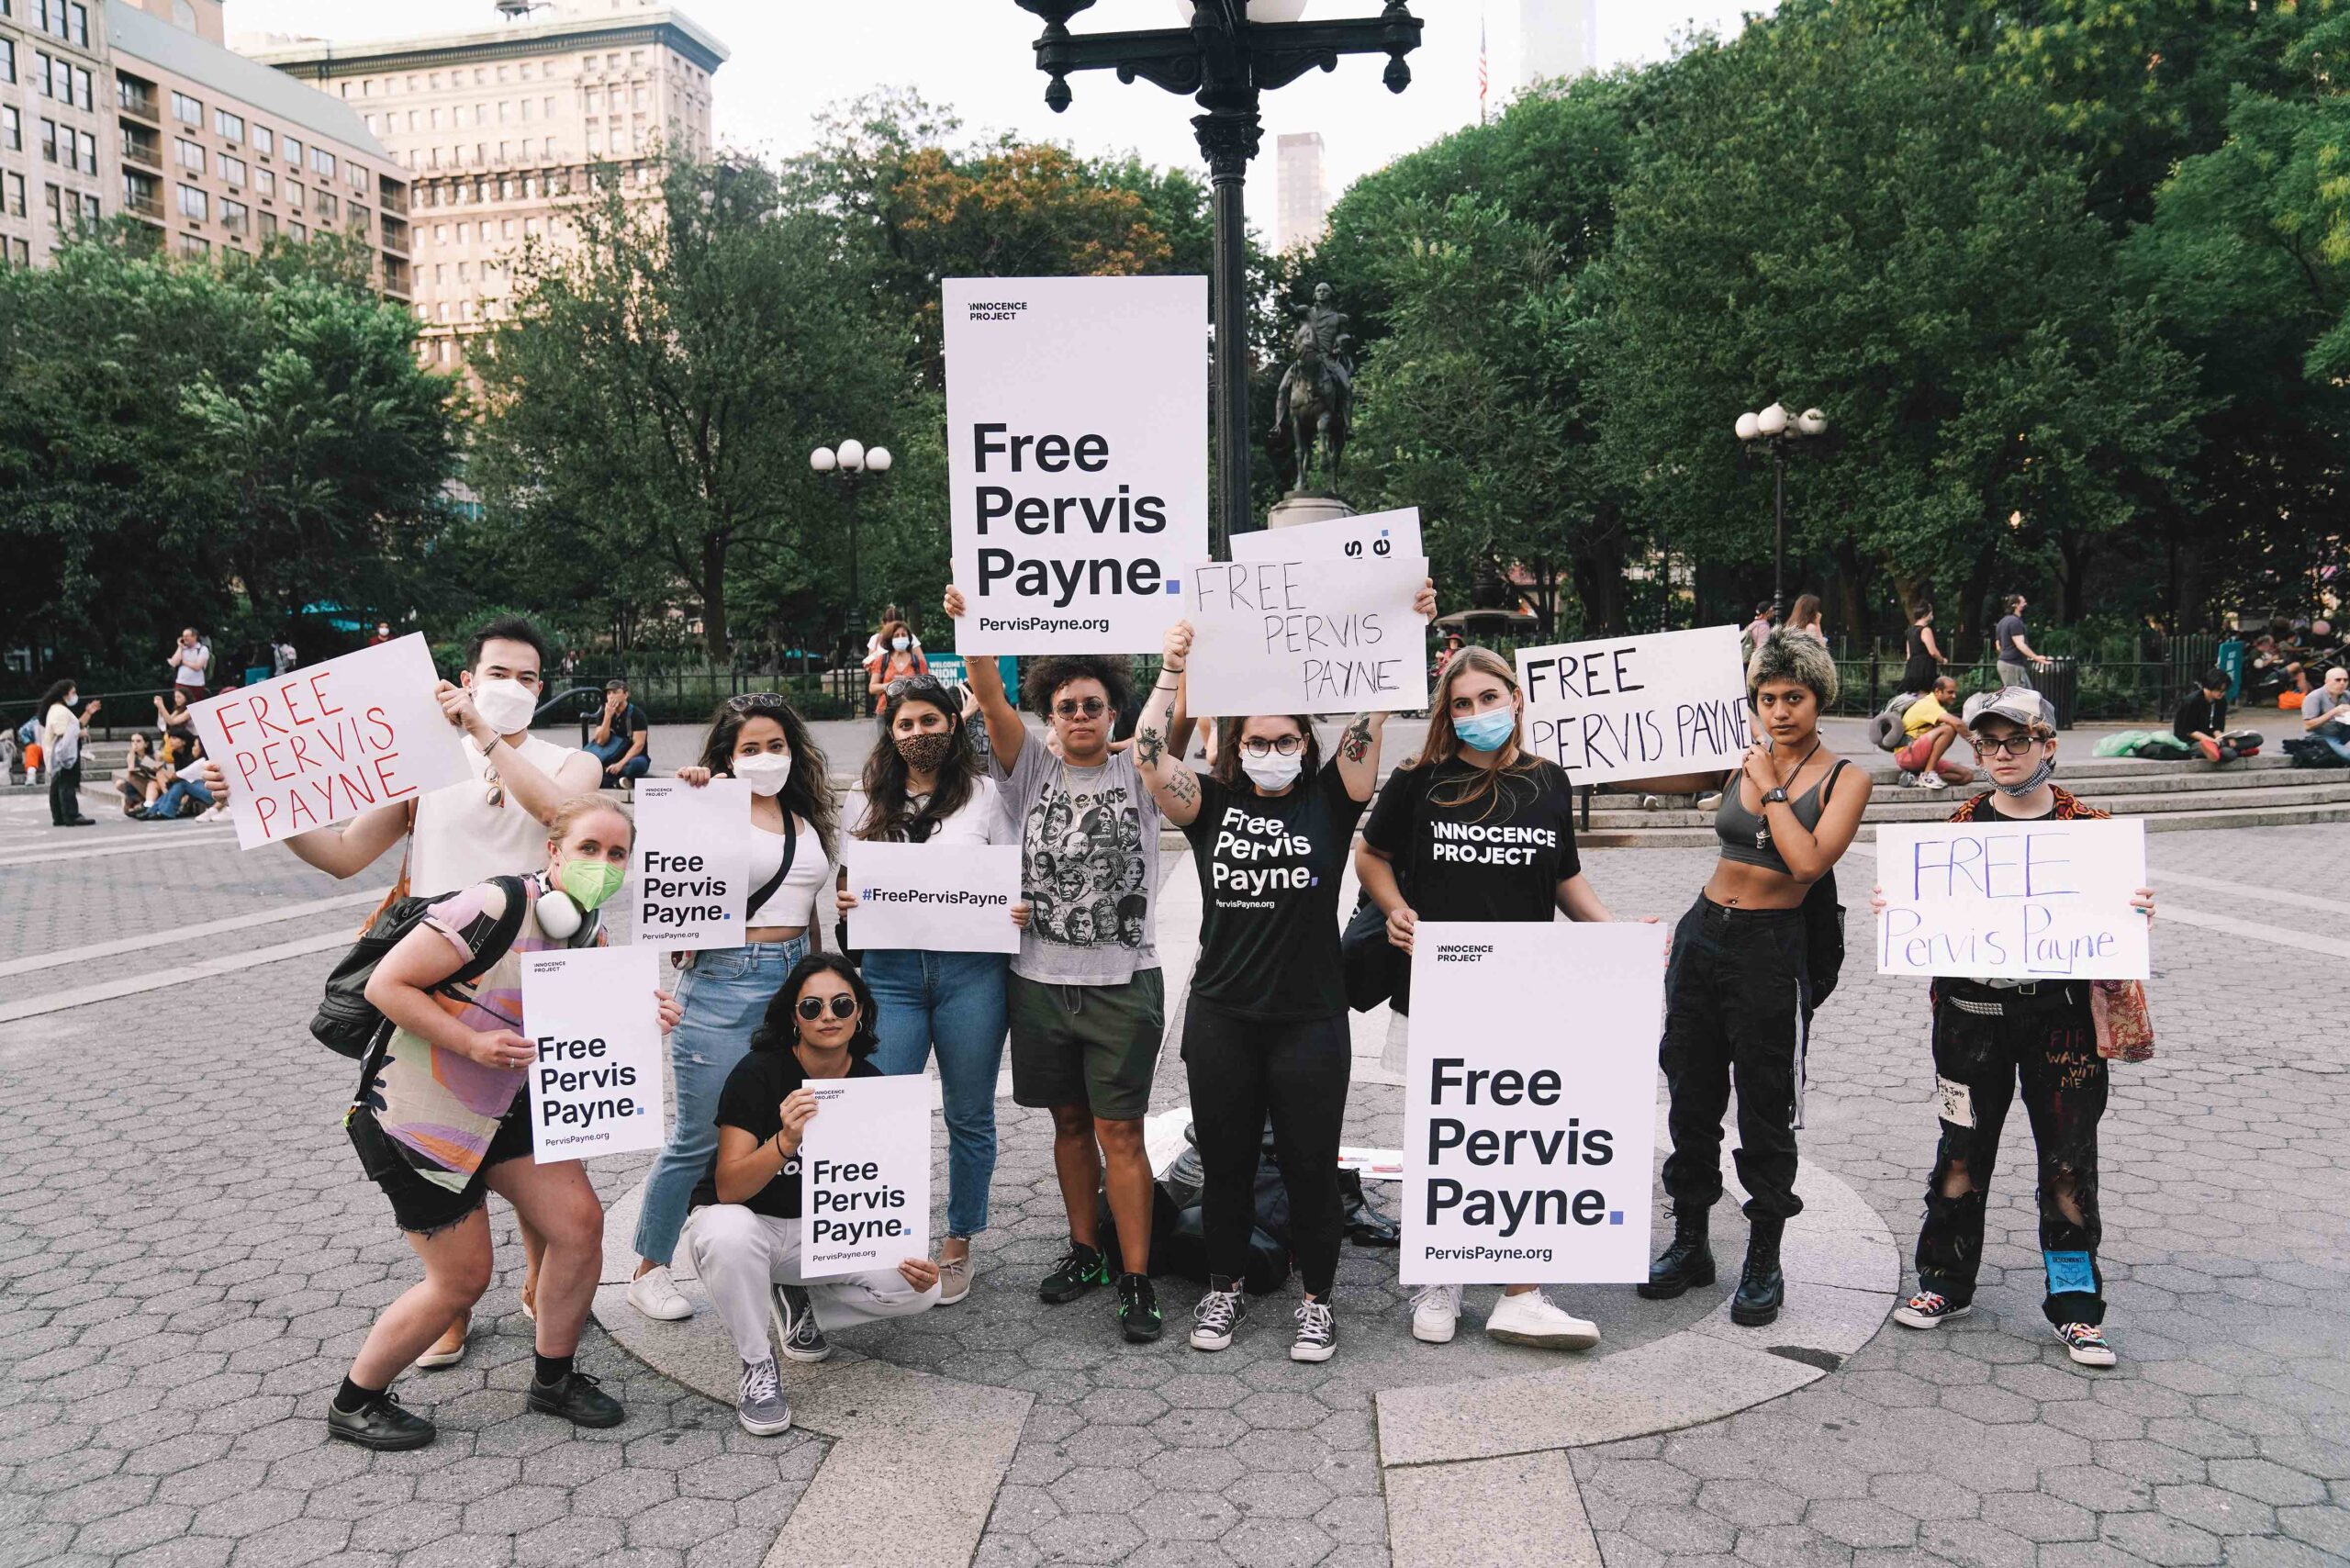 Supporters at the #FreePervisPayne rally in New York's Union Square on Sept. 8, 2021. (Image: Elijah Craig II/Innocence Project)